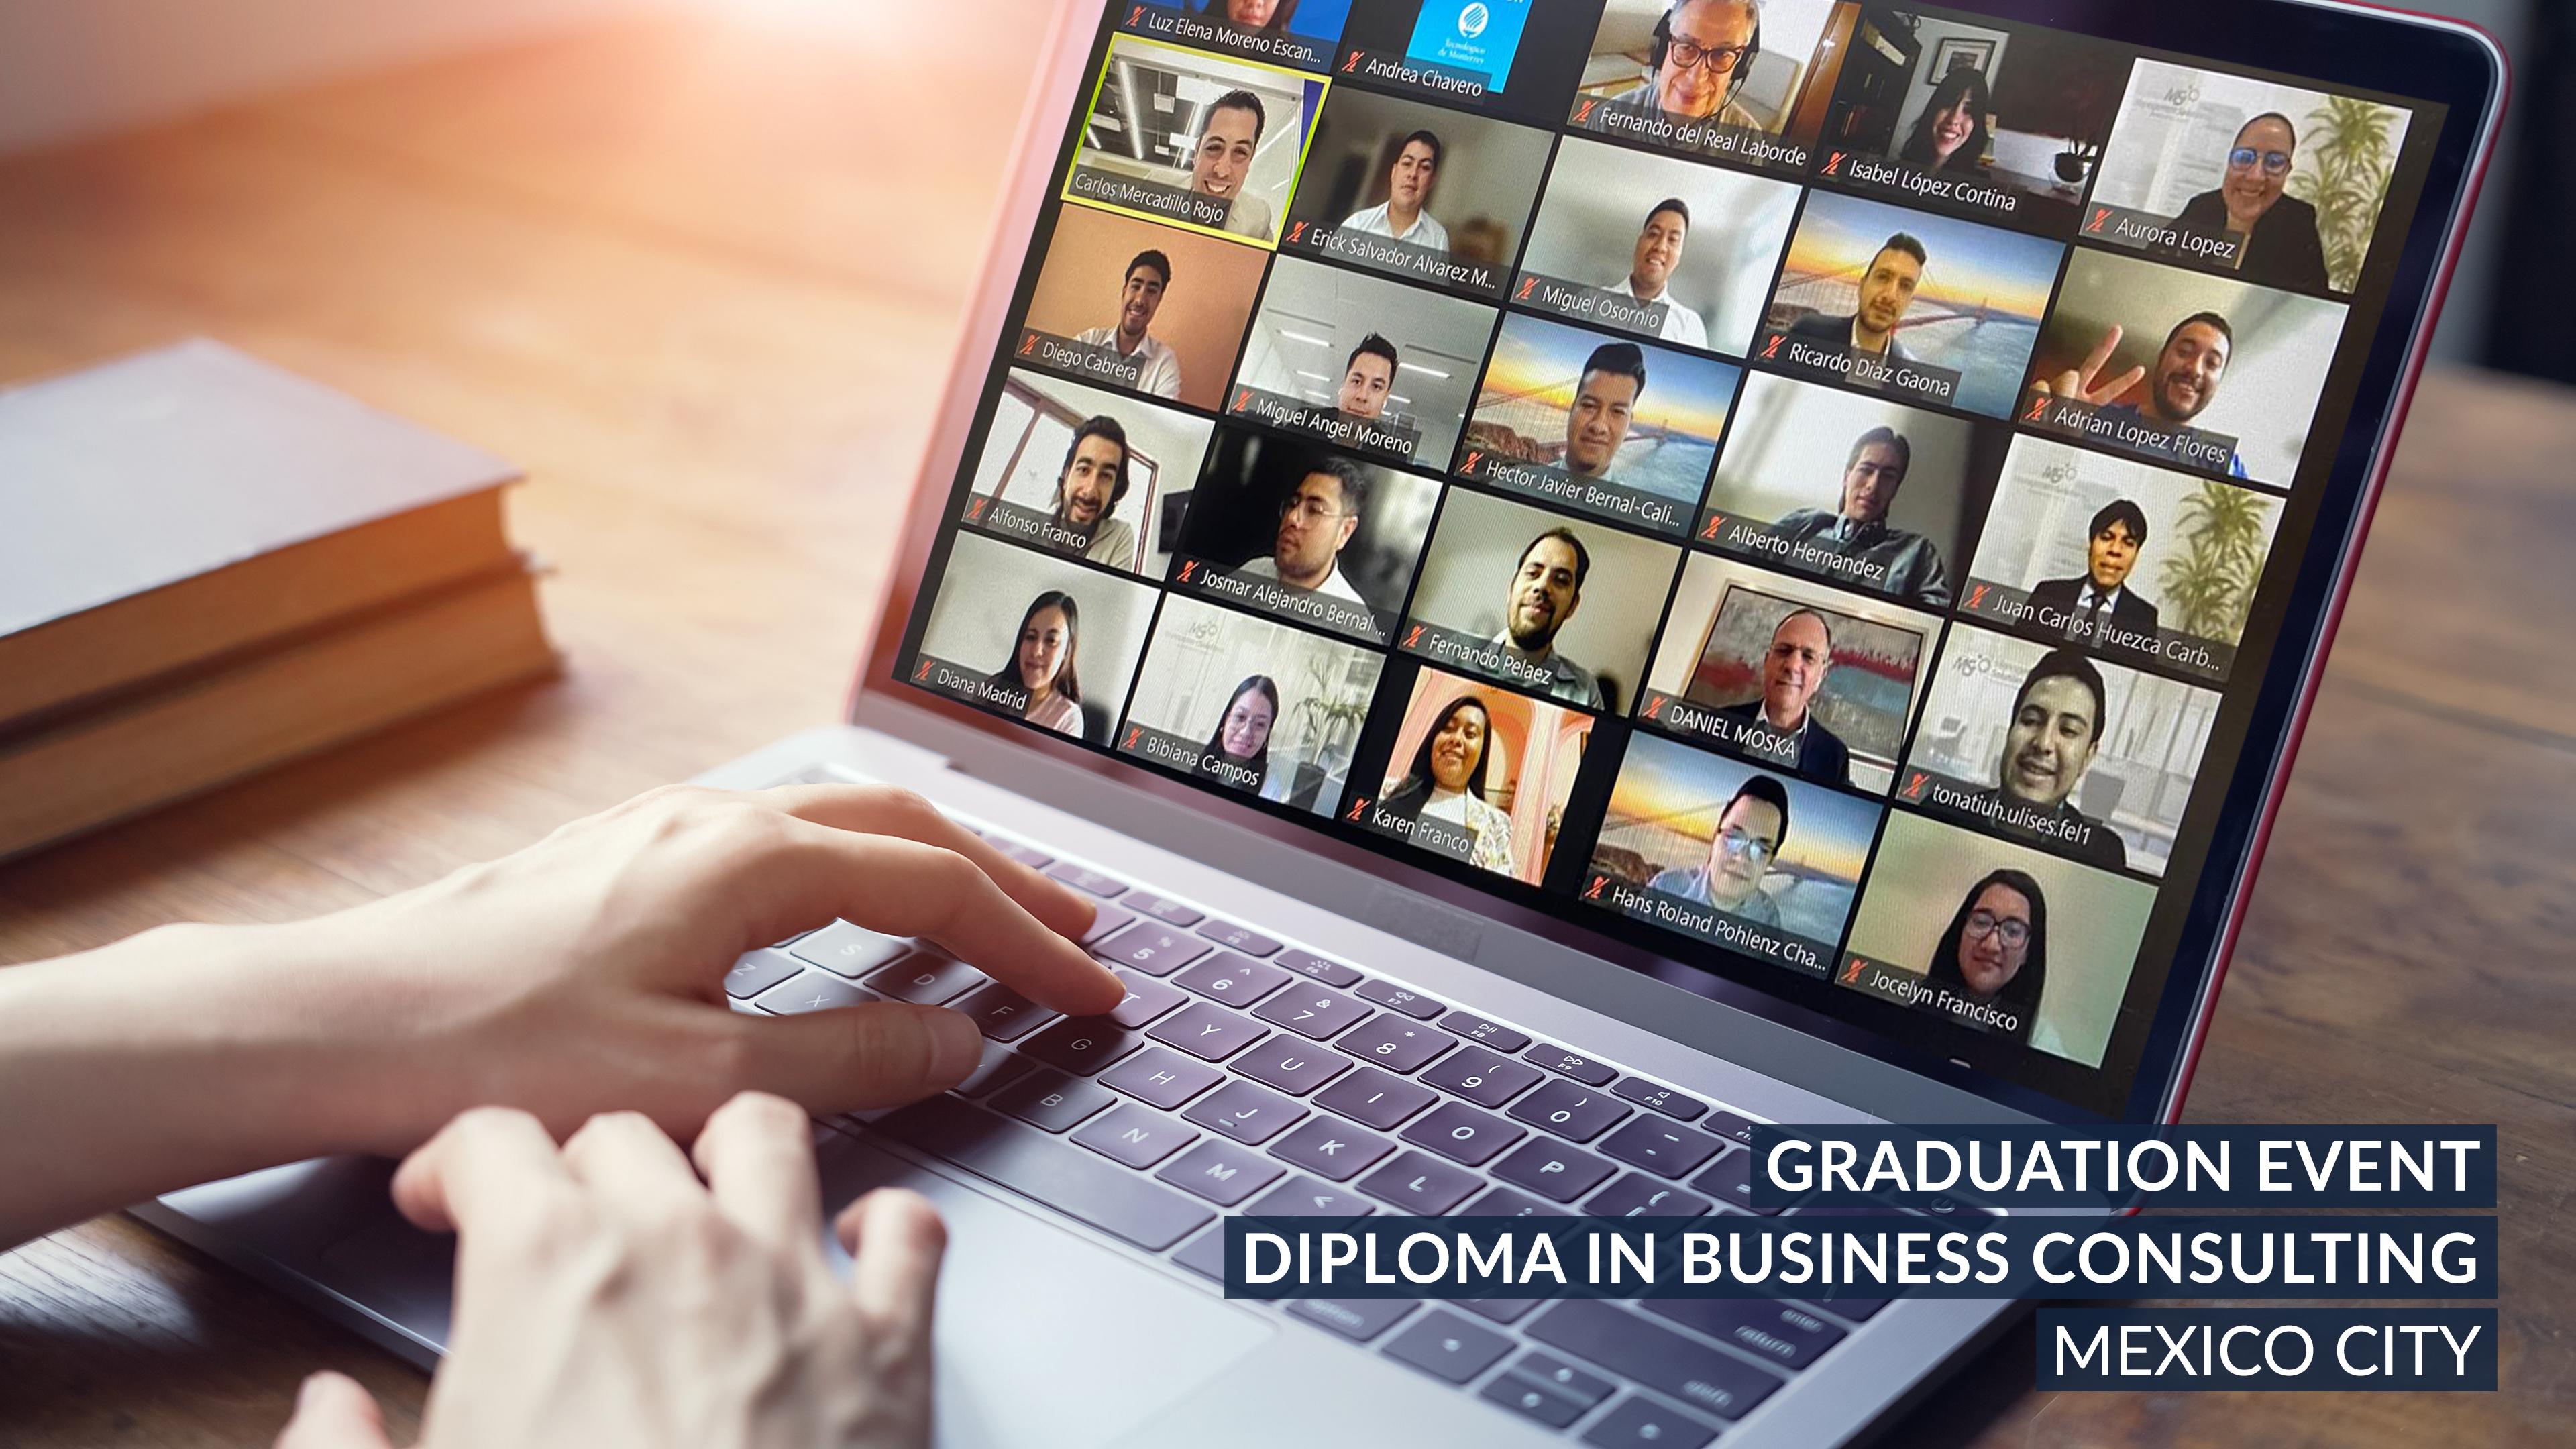 Commencement for the Business Consulting Diploma Program´s 7th Graduating Class